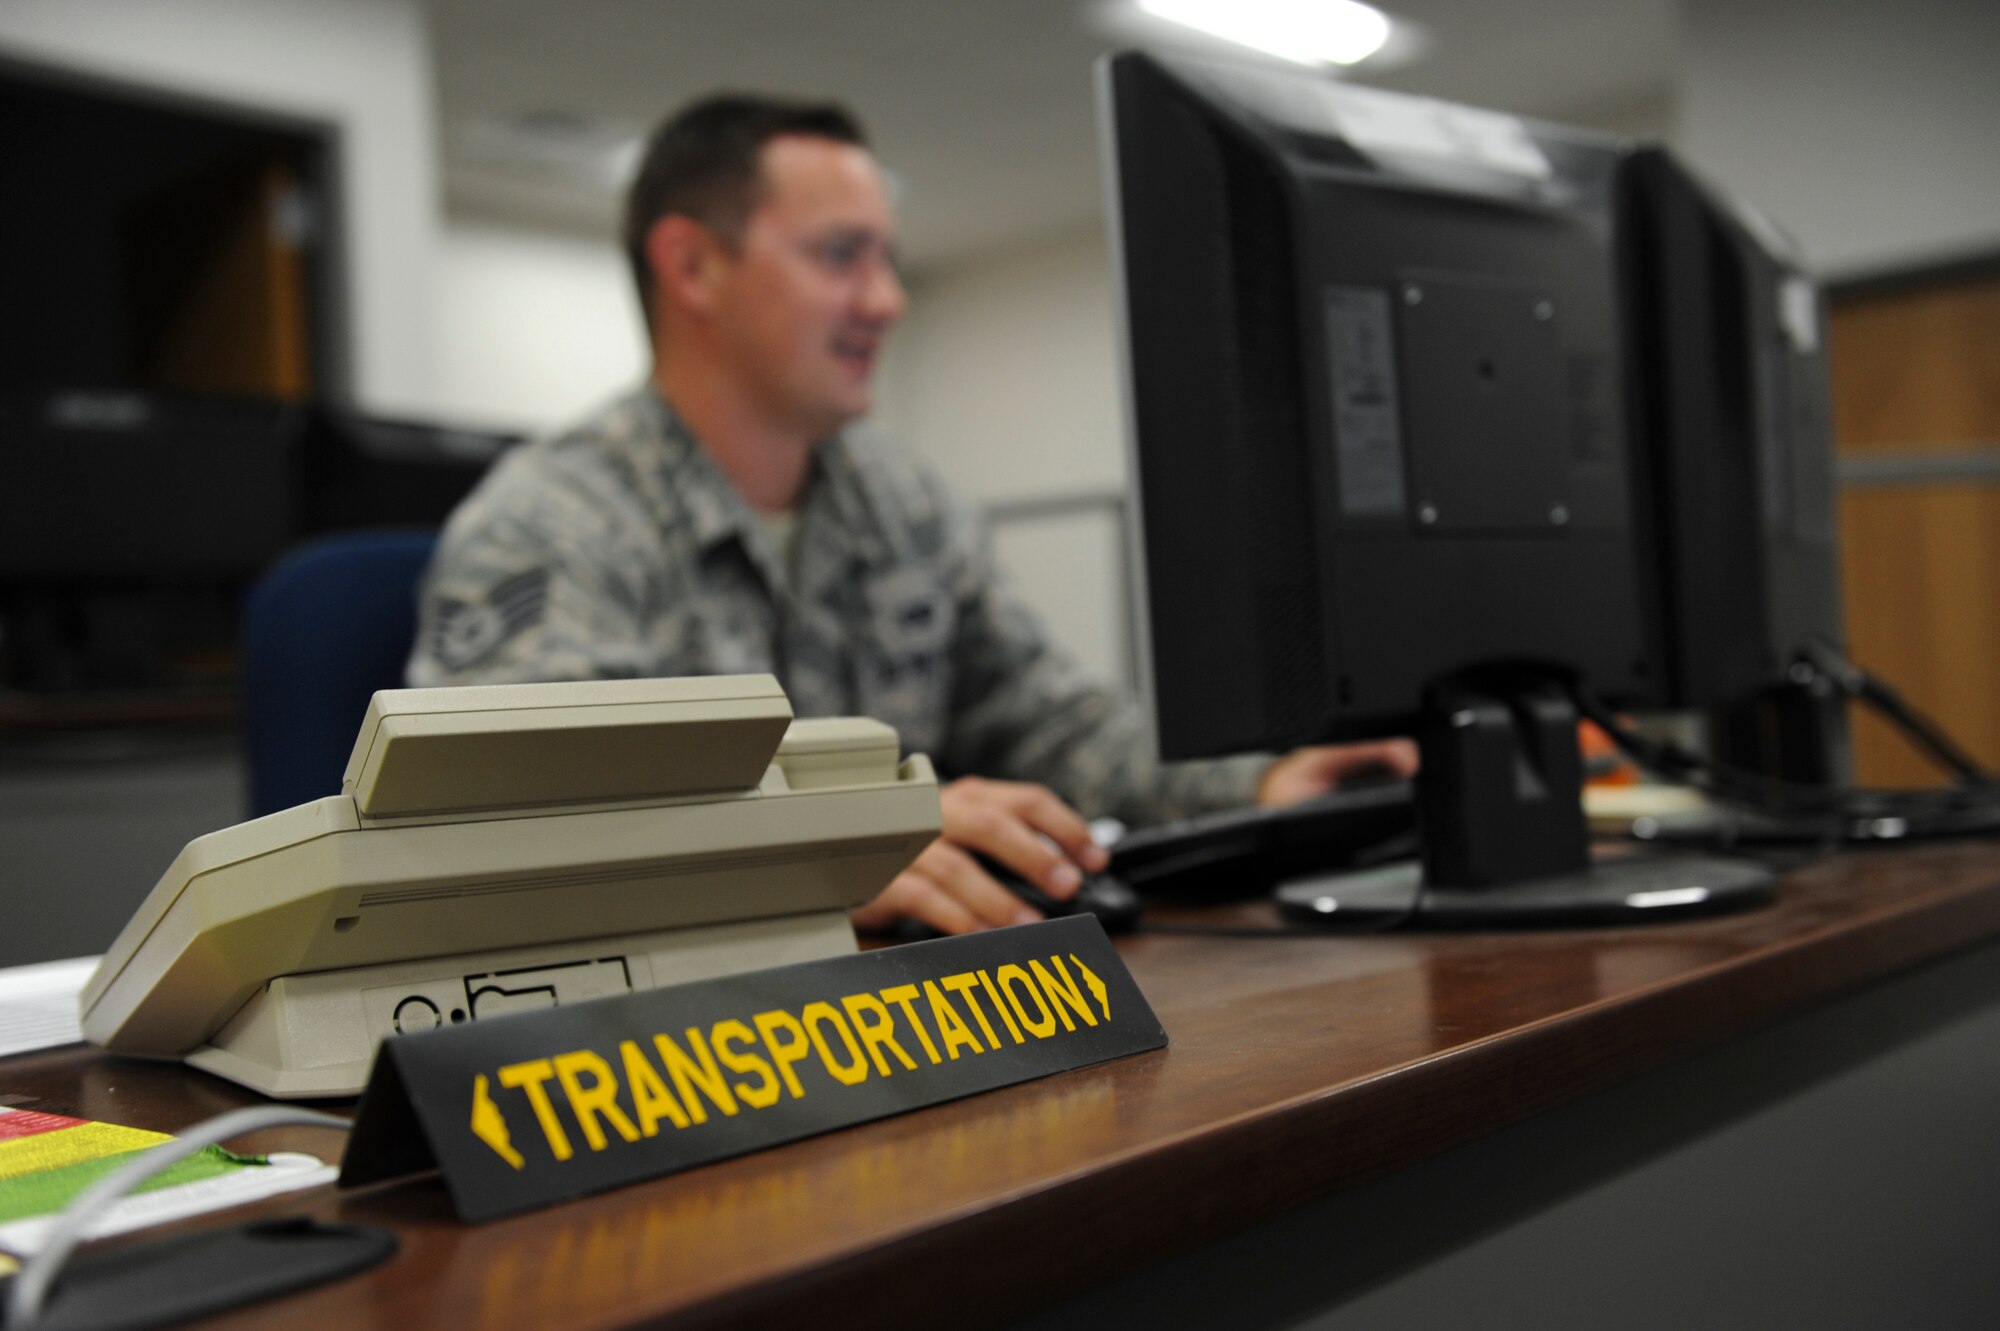 U.S. Air Force Staff Sgt. William Peters, a vehicle operation technician with the 509th Logistics Readiness Squadron (LRS), oversees the transportation section of the deployment control center during Exercise Global Thunder 17 (GT17) at Whiteman Air Force Base, Mo., Oct. 25, 2016. The deployment control center is the centralized location tracking on the 509th LRS process during the exercise. GT17 is an annual command and control exercise designed to train U.S. Strategic Command forces and assess joint operational readiness. (U.S. Air Force Senior Airman Danielle Quilla)